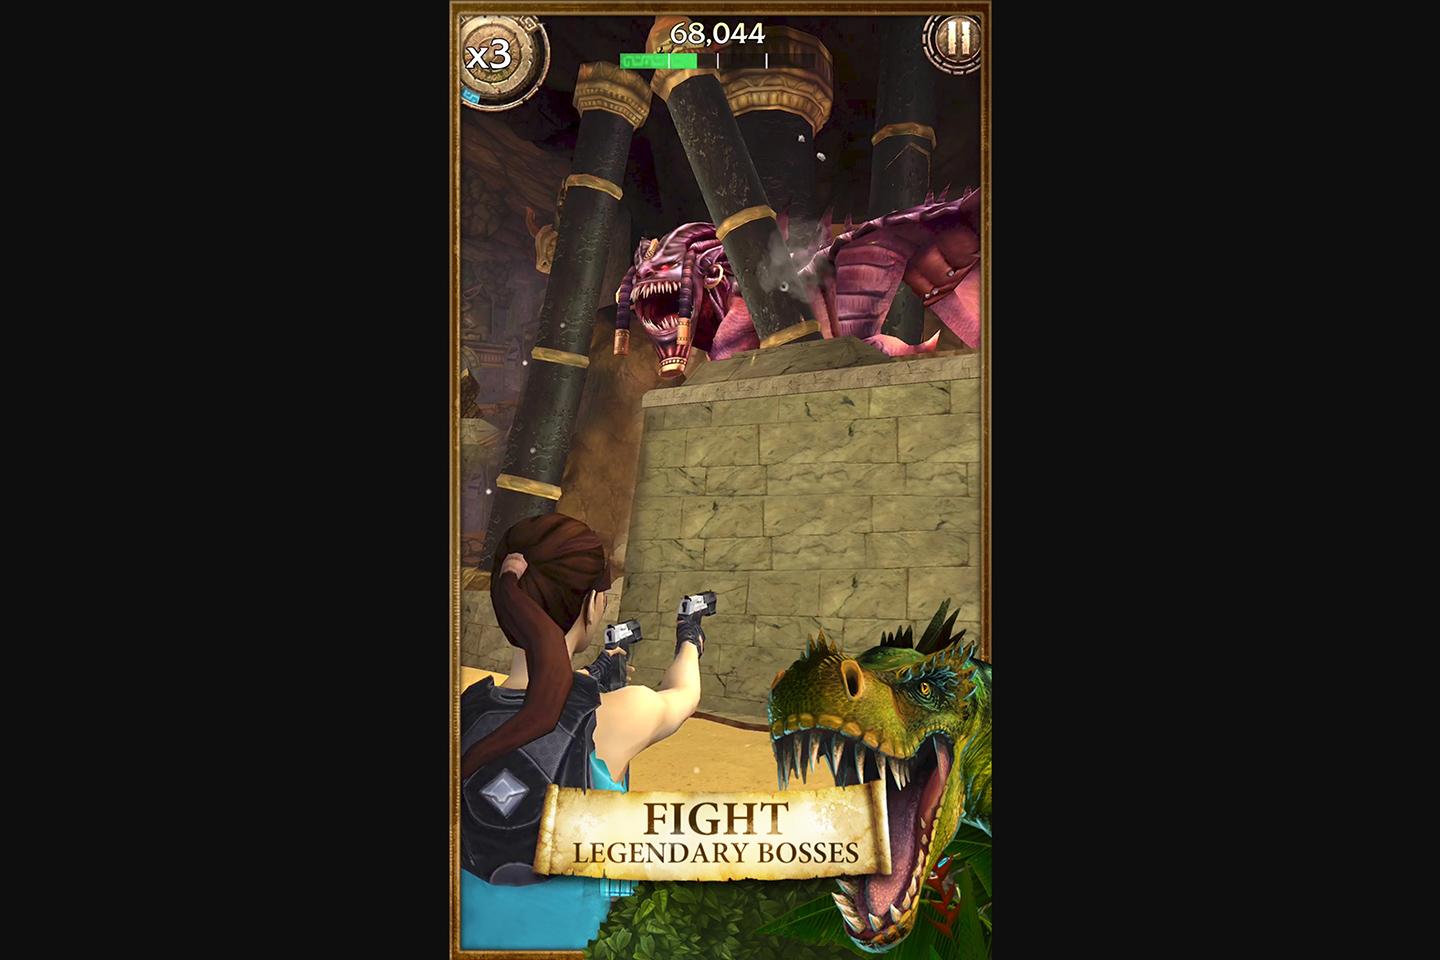 A tense moment in a mobile game where Lara Croft is aiming at a monstrous creature, with the caption 'Fight Legendary Bosses' illustrating the game's combat challenges.